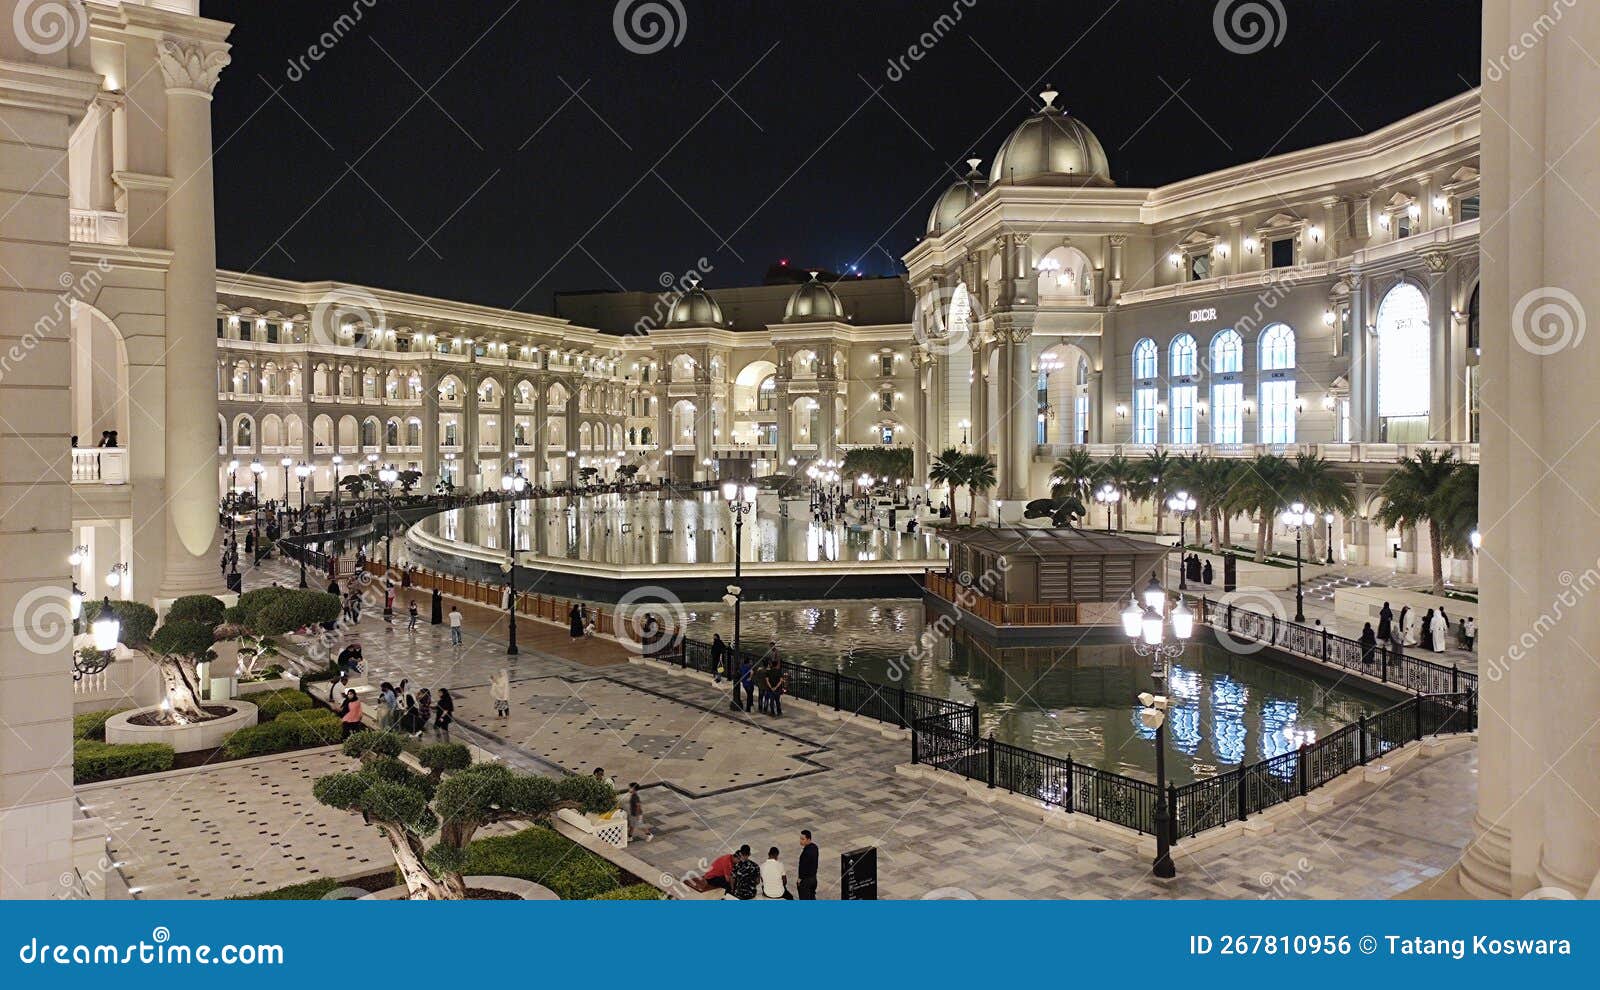 Place Vendome Mall in Lusail city, Qatar interior view at night